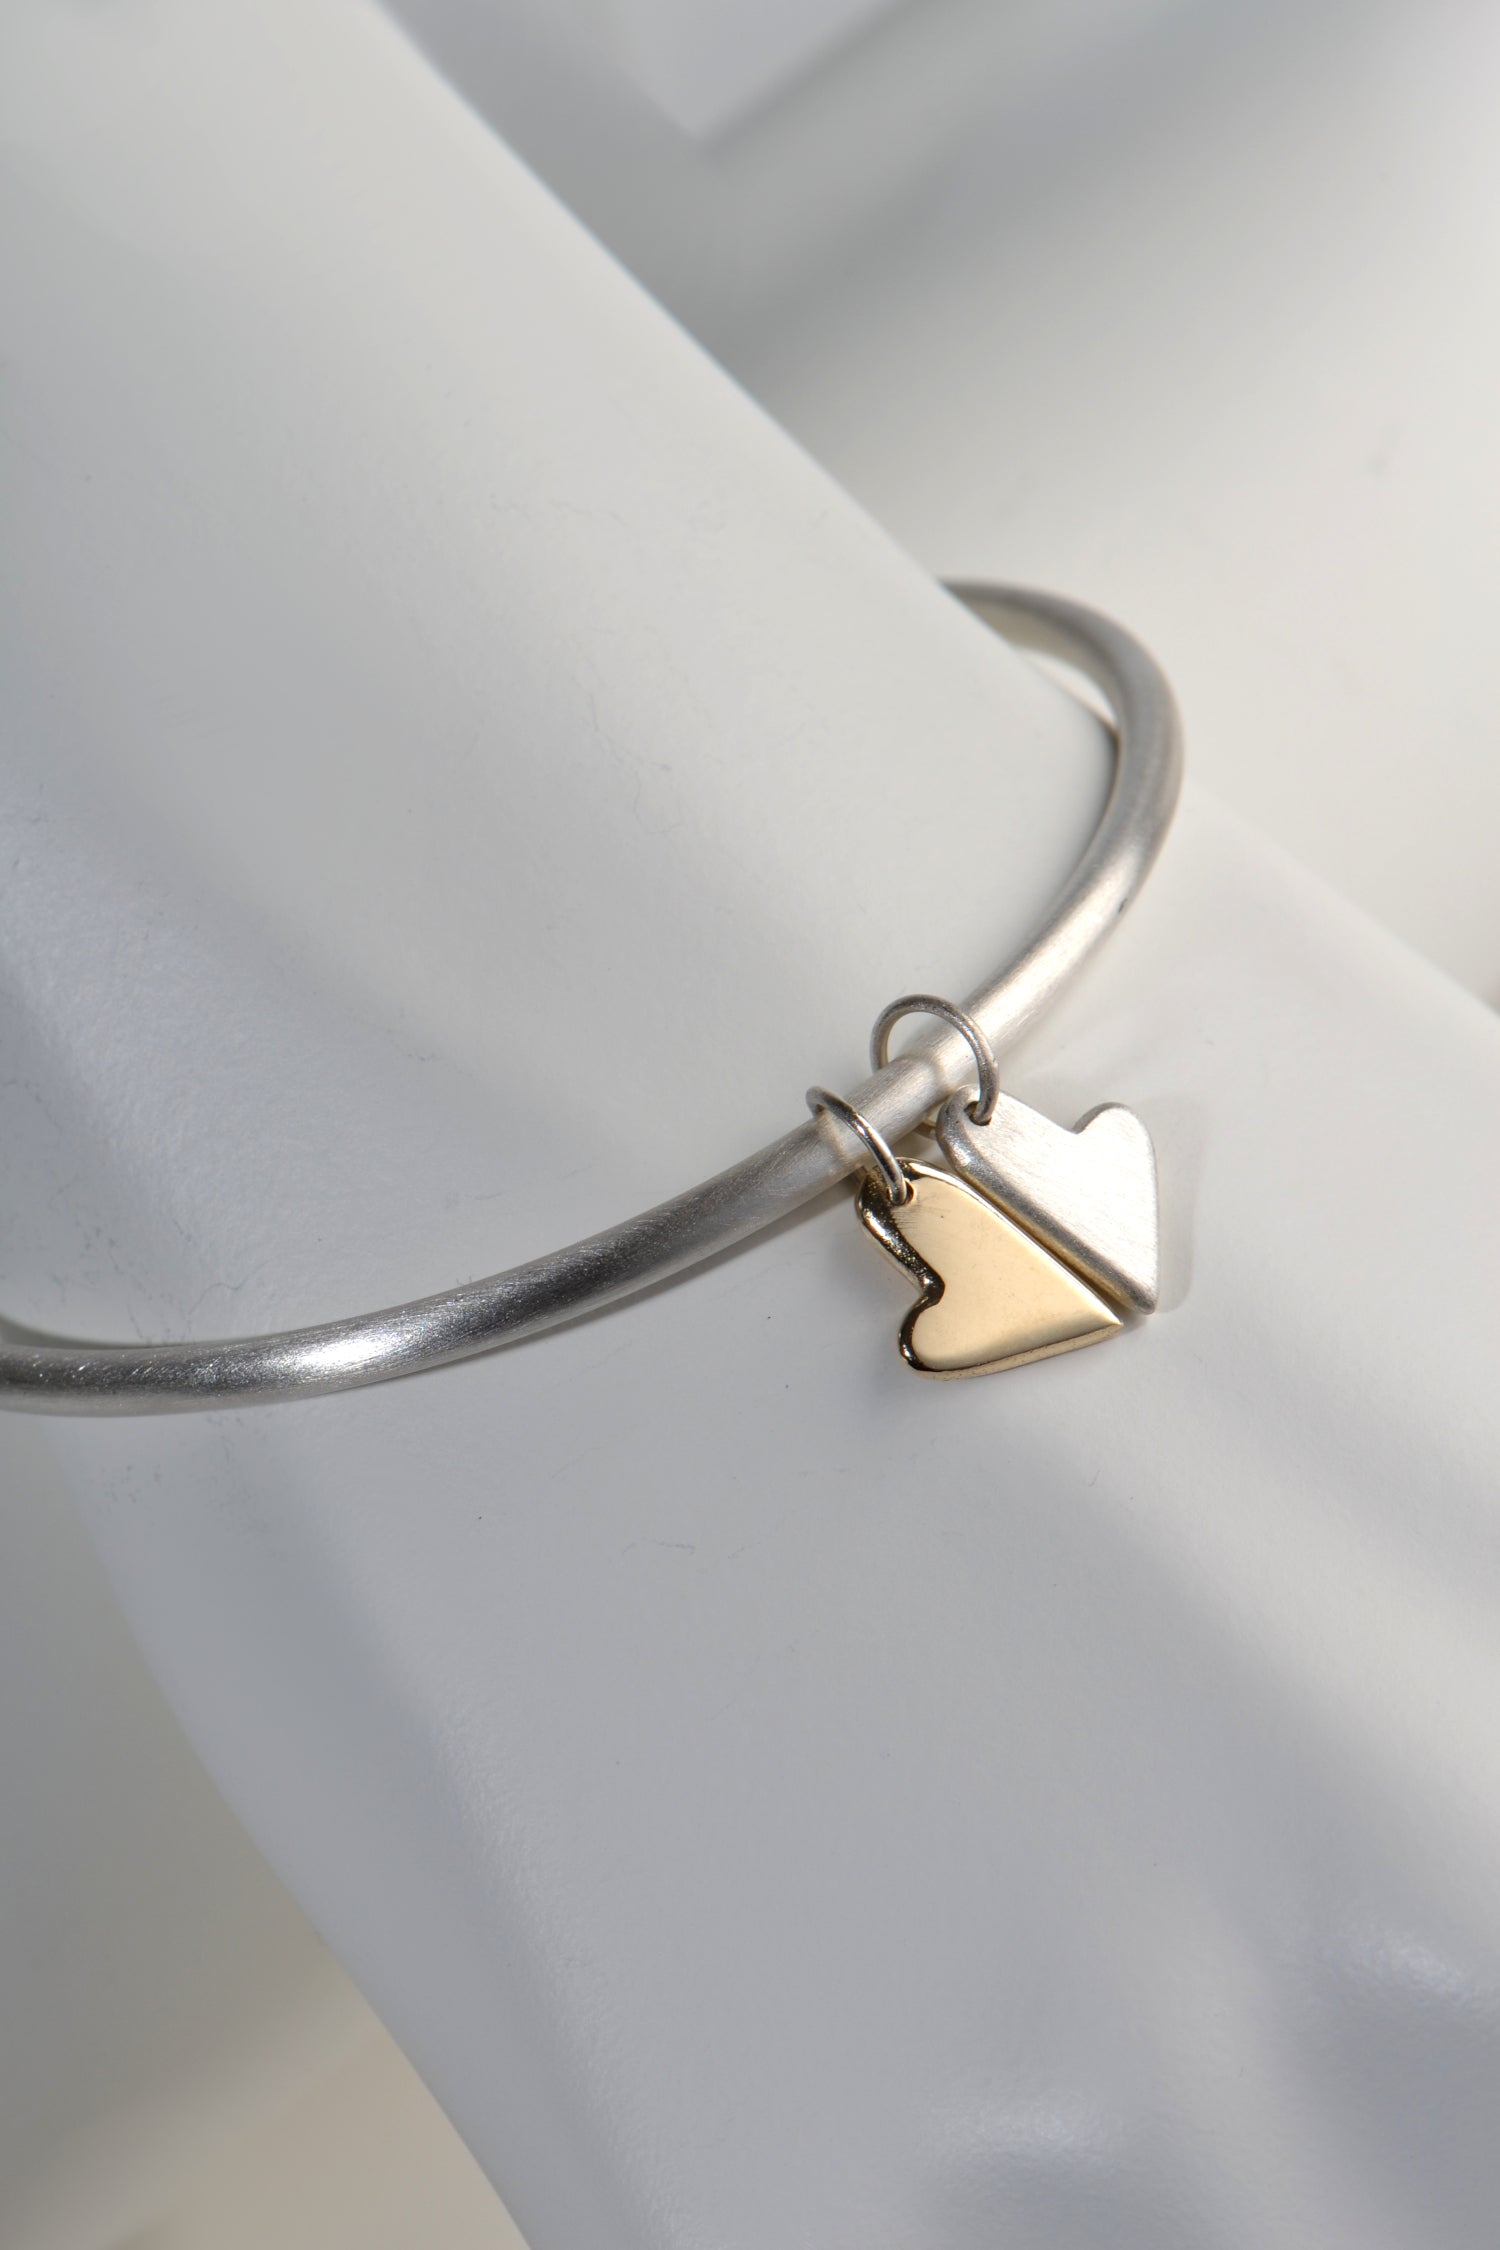 silver handmade bangle with two moving heart charms, one in silver and one in gold